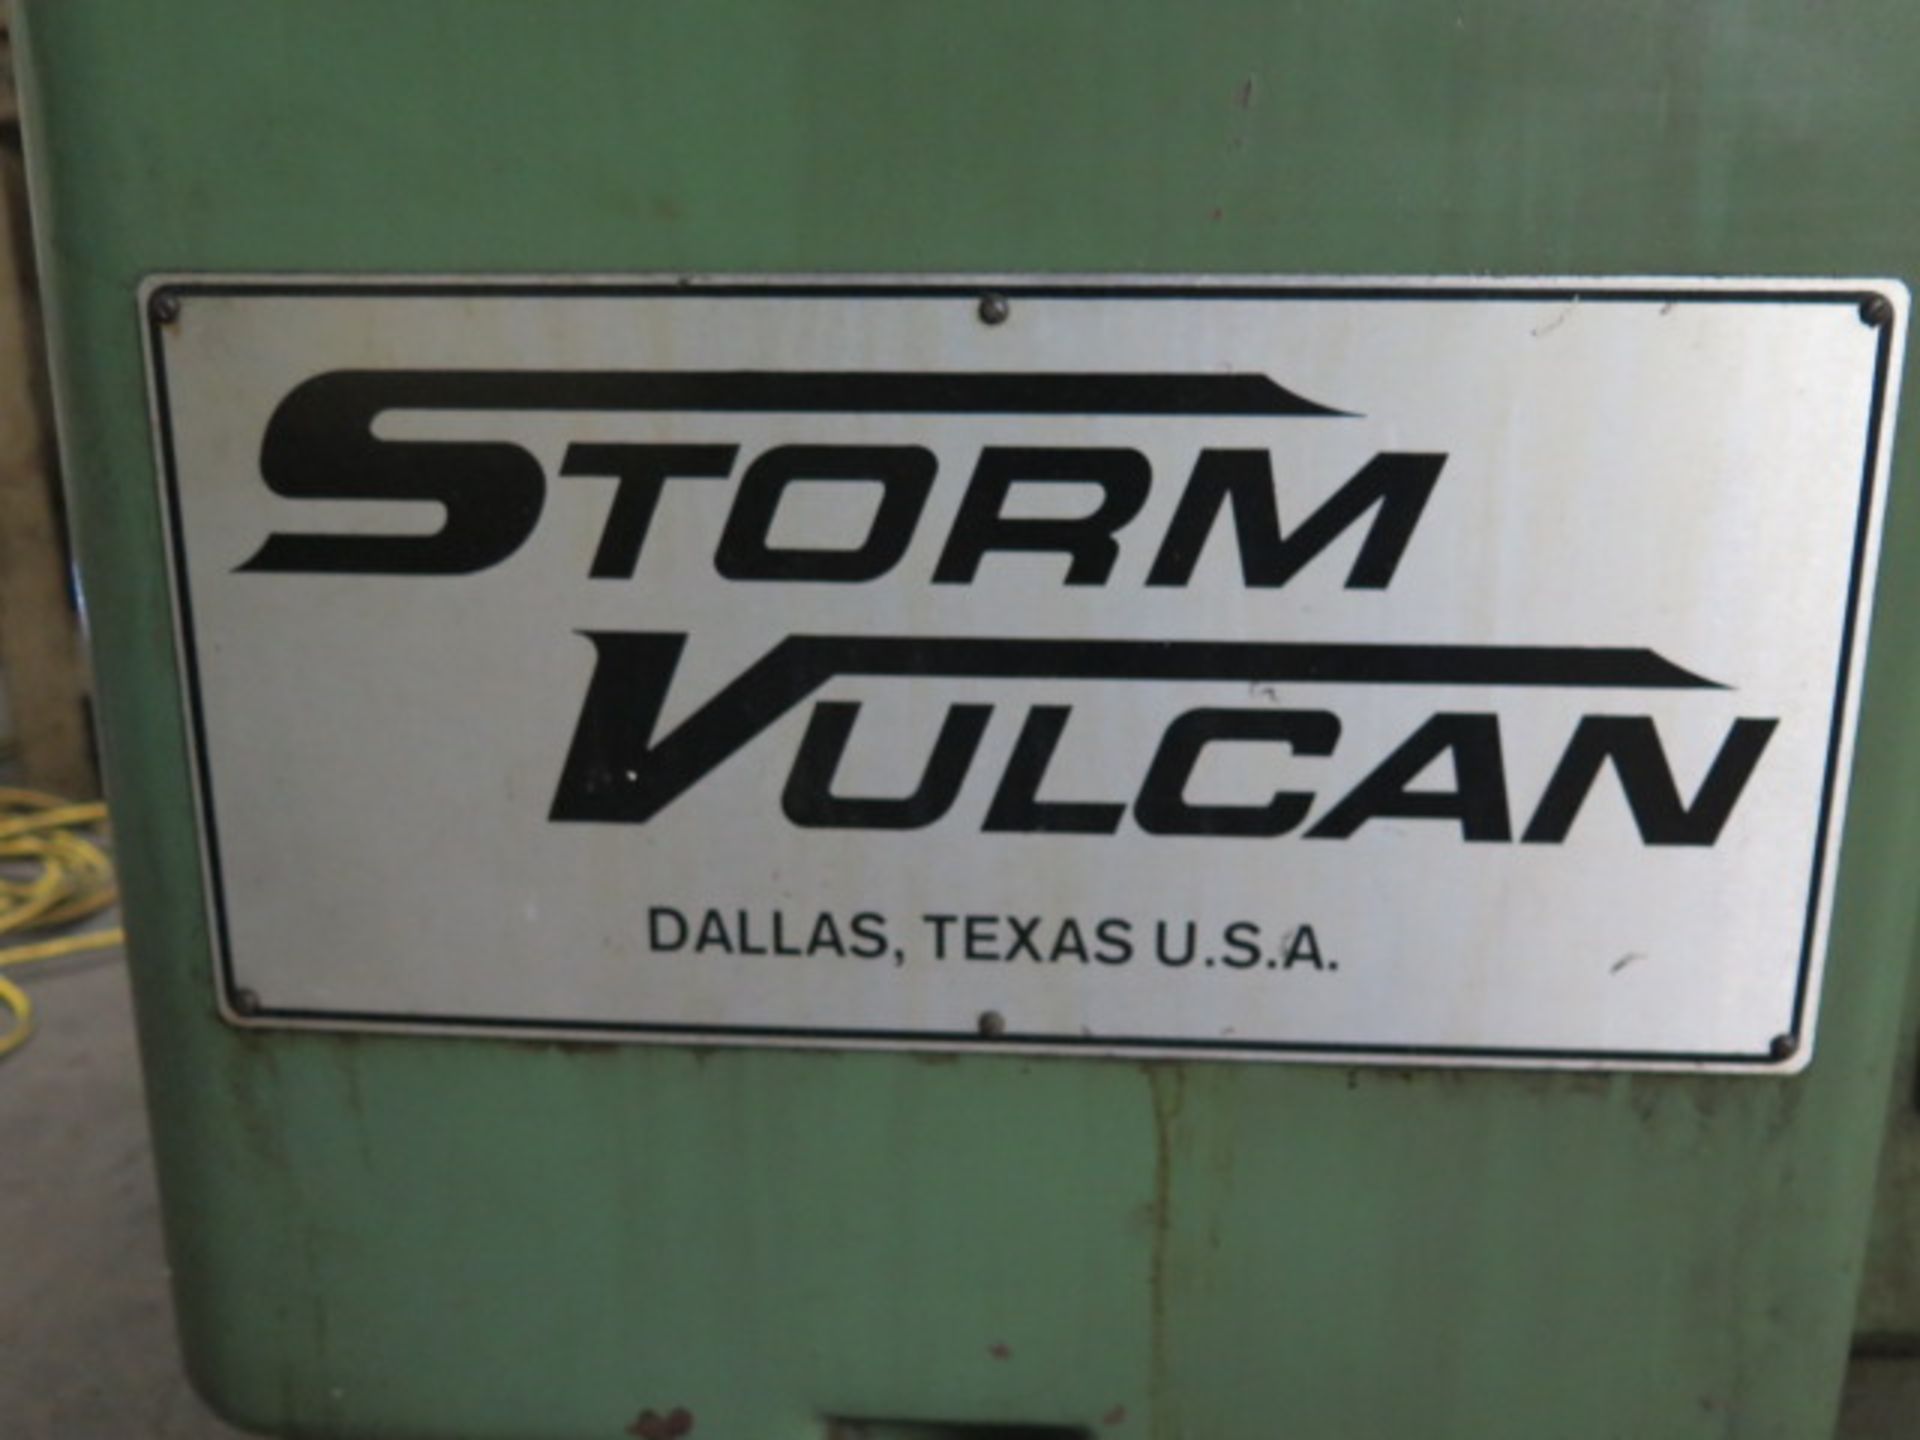 Storm Vulcan mdl. 15 Cam Shaft Grinder s/n 800-76 w/ Motorized Work Head, Tailstock, SOLD AS IS - Image 15 of 16